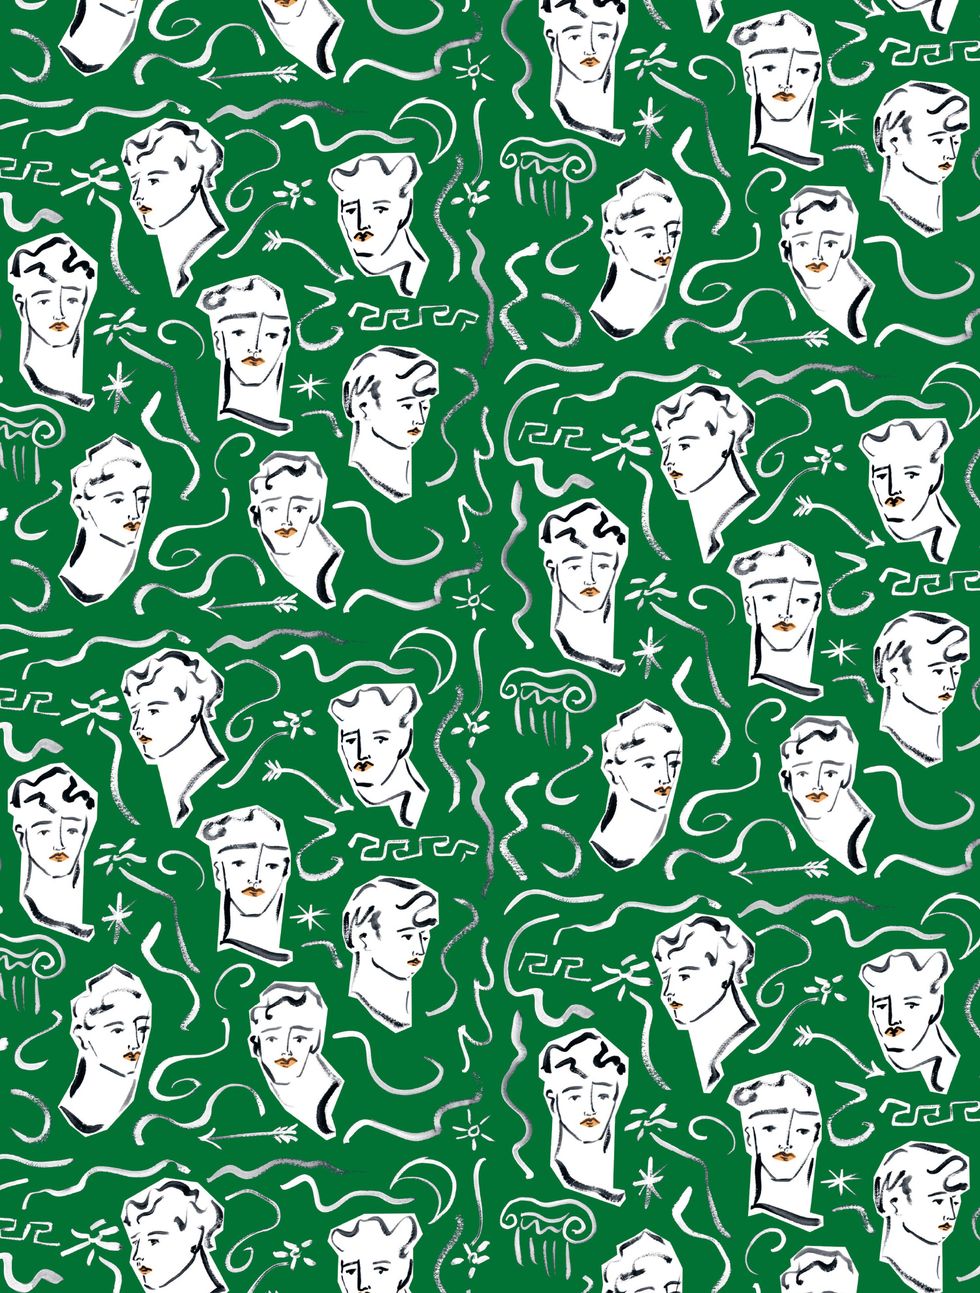 Green, People, Pattern, Design, Crowd, Illustration, Textile, Art, Fictional character, 